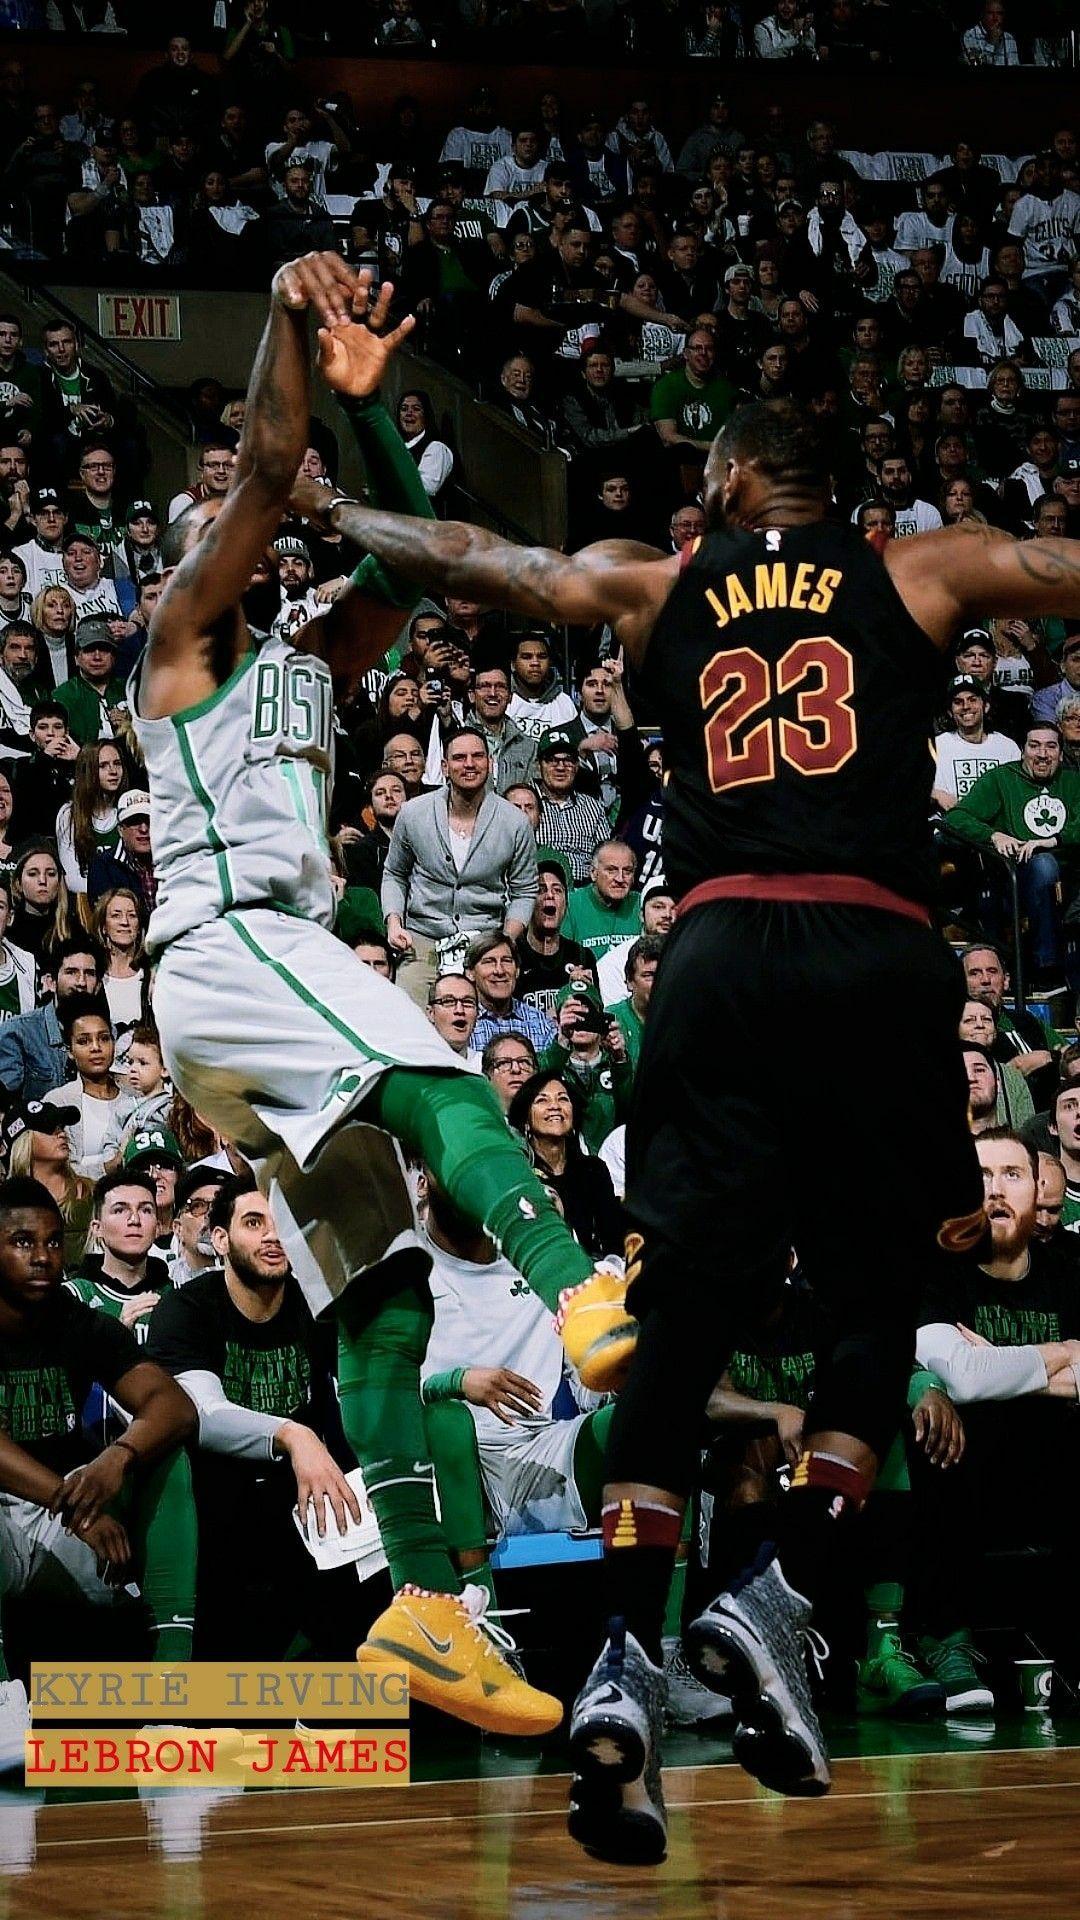 Kyrie Irving and Lebron James wallpaper. Uncle Drew